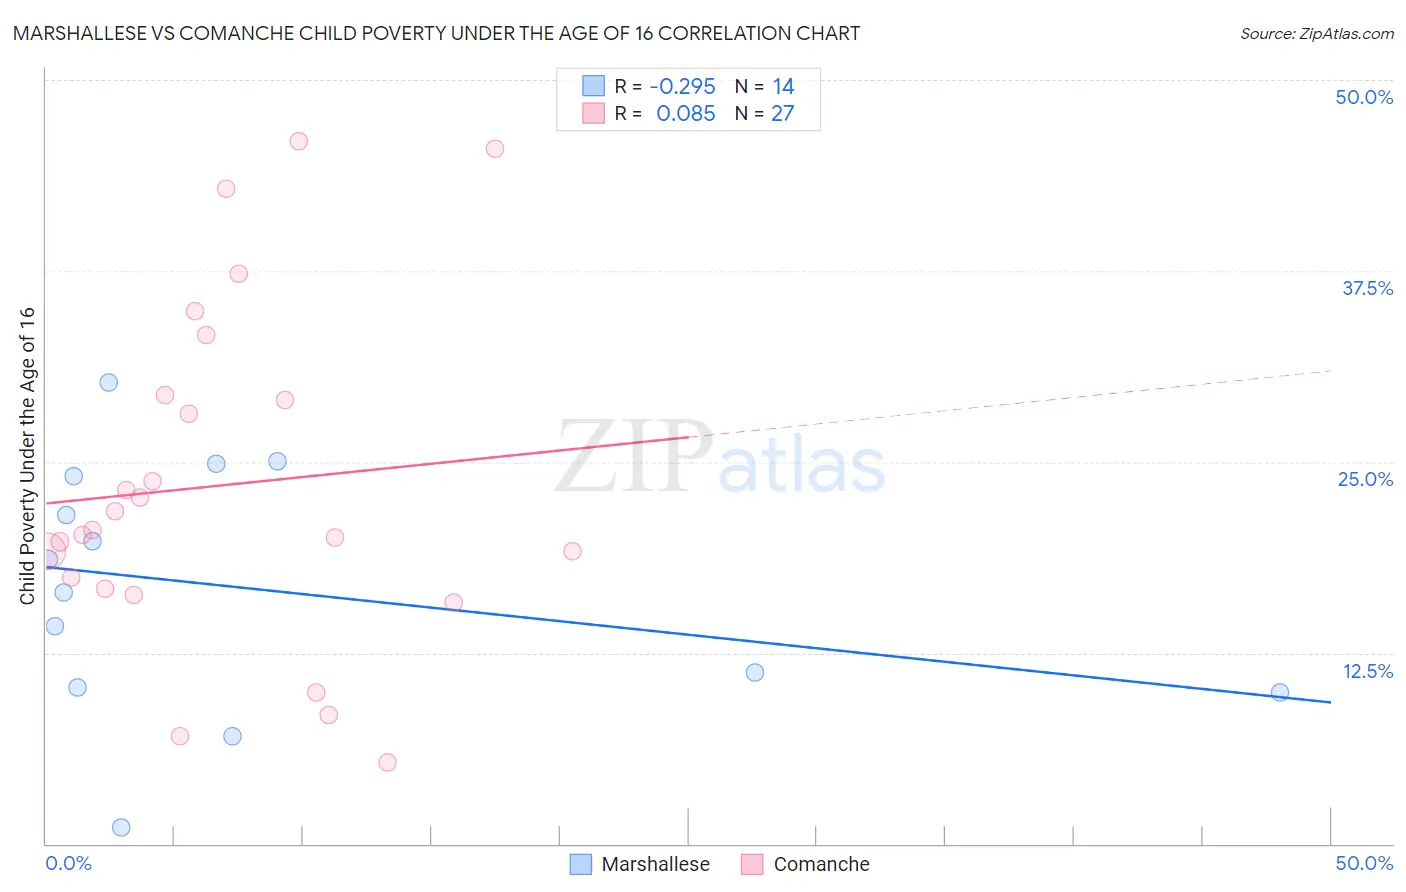 Marshallese vs Comanche Child Poverty Under the Age of 16